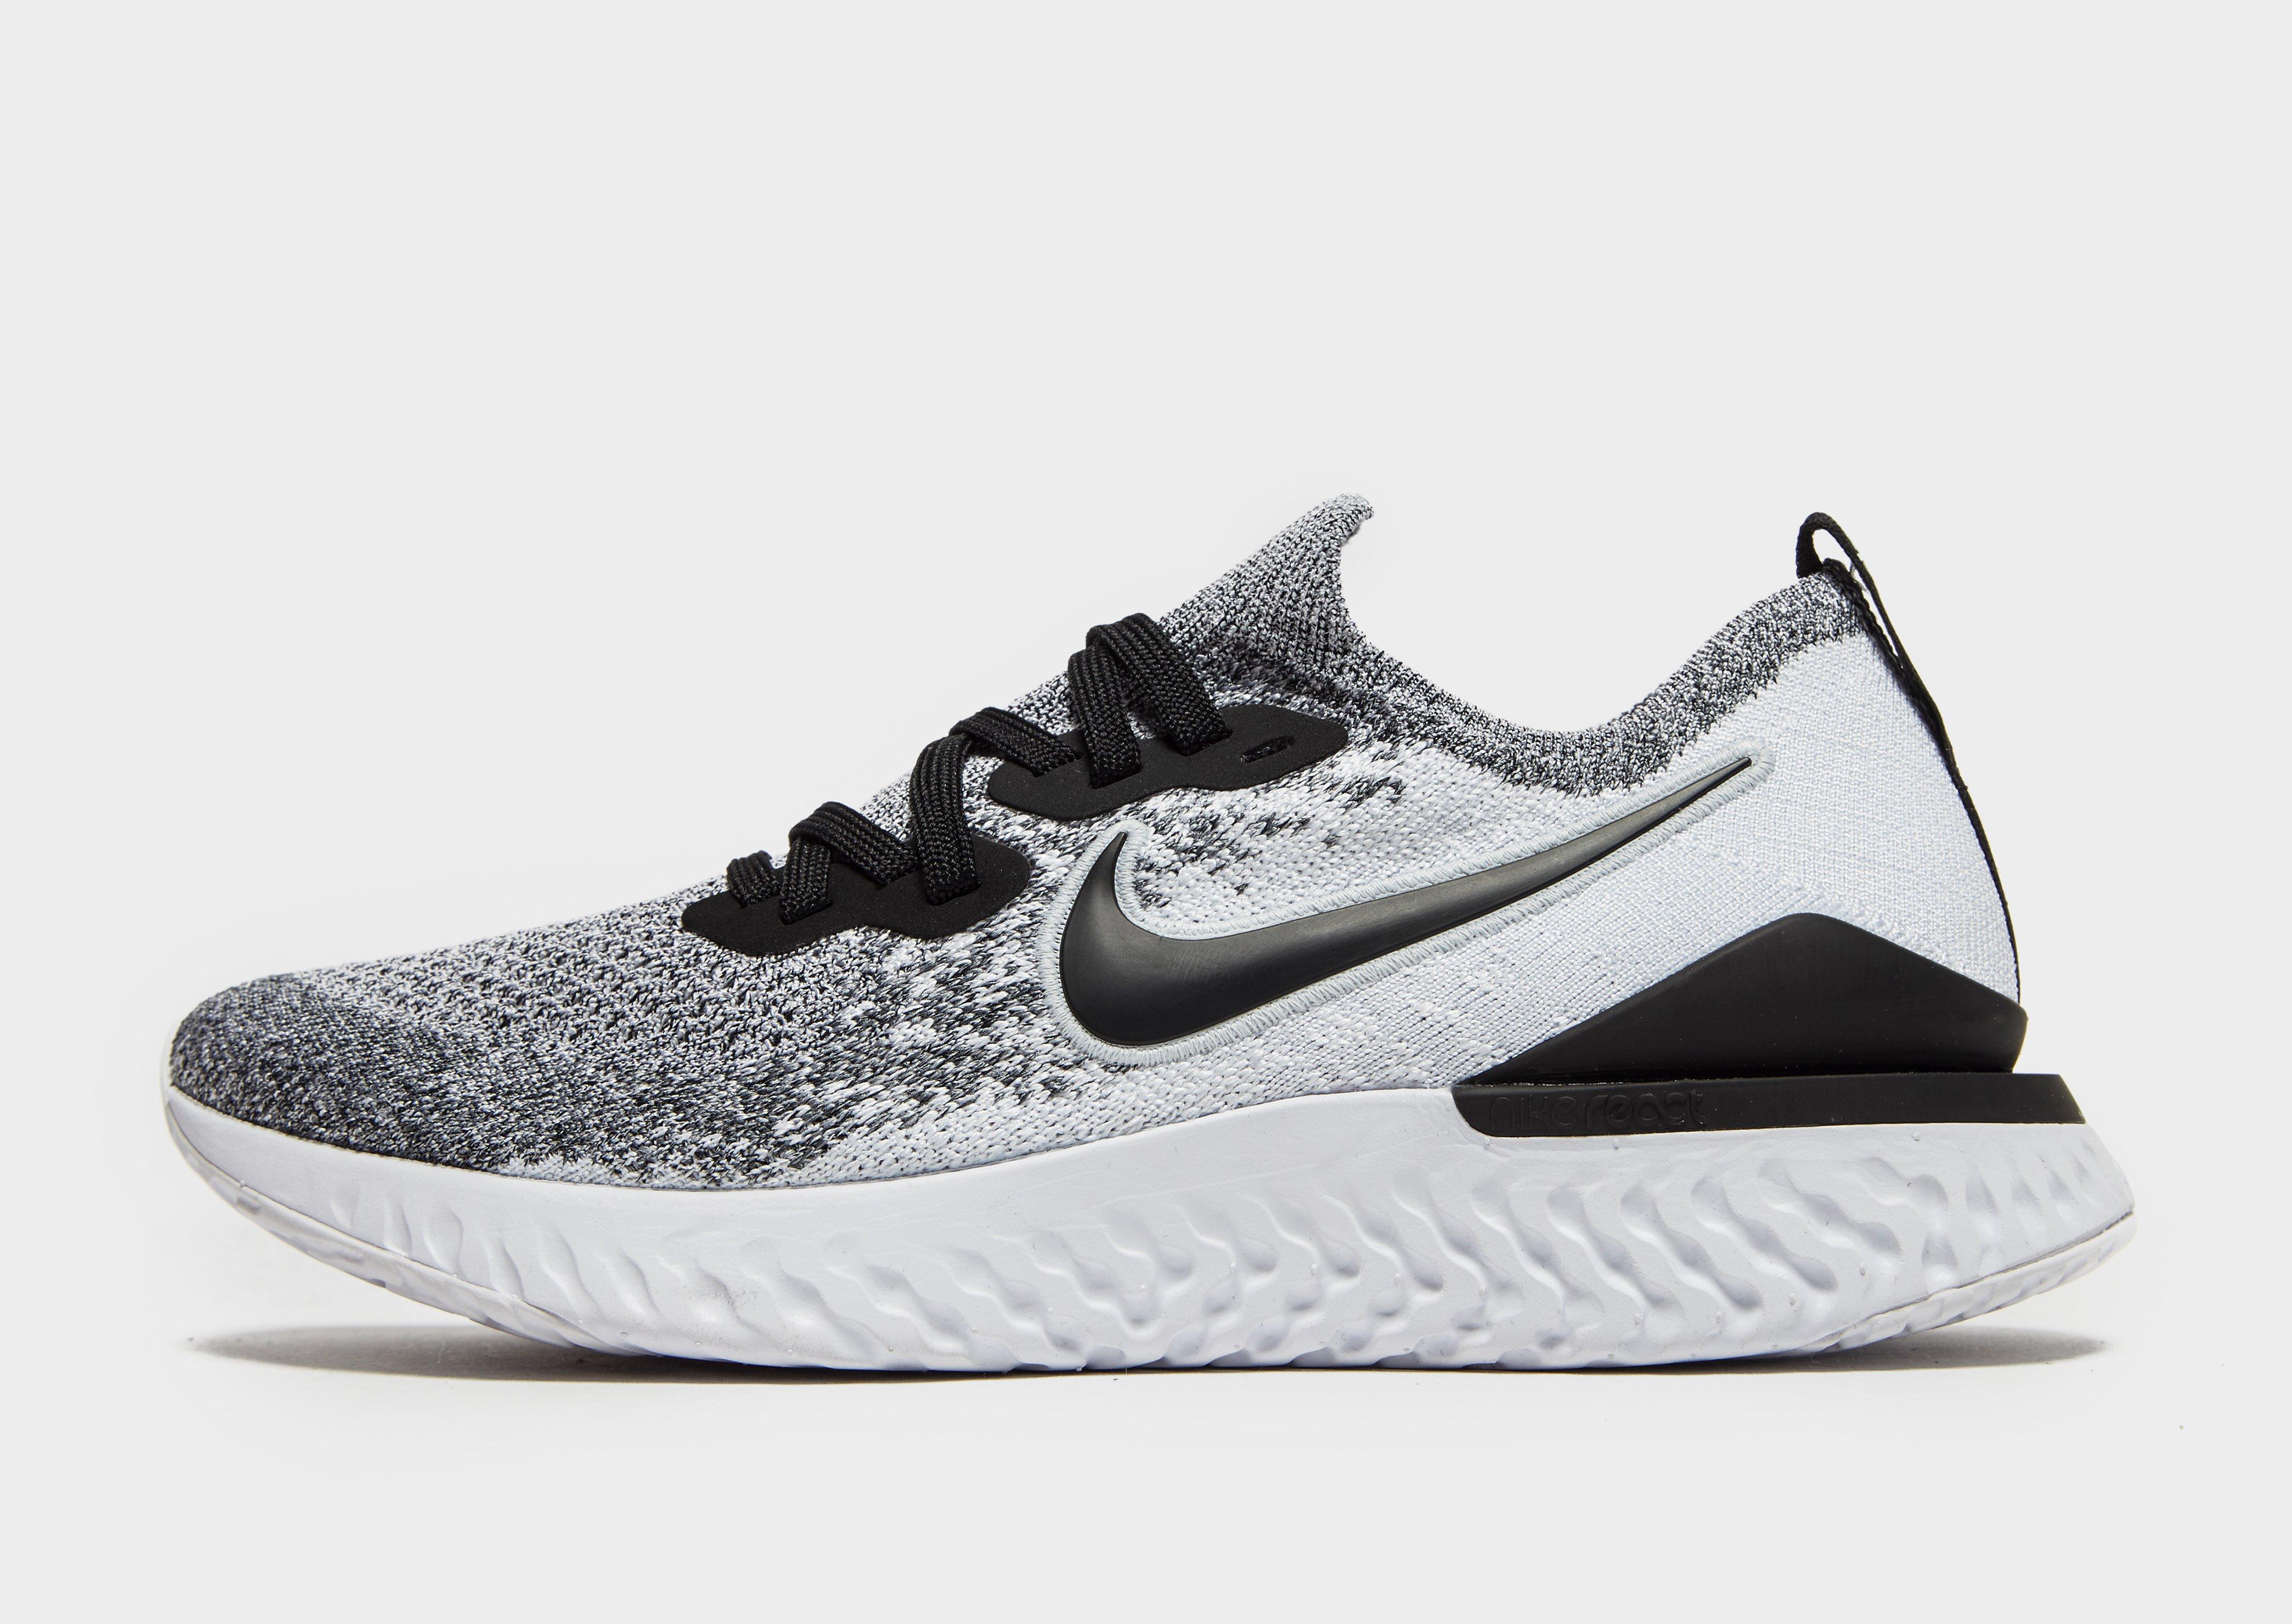 nike running epic react flyknit trainers in grey and black